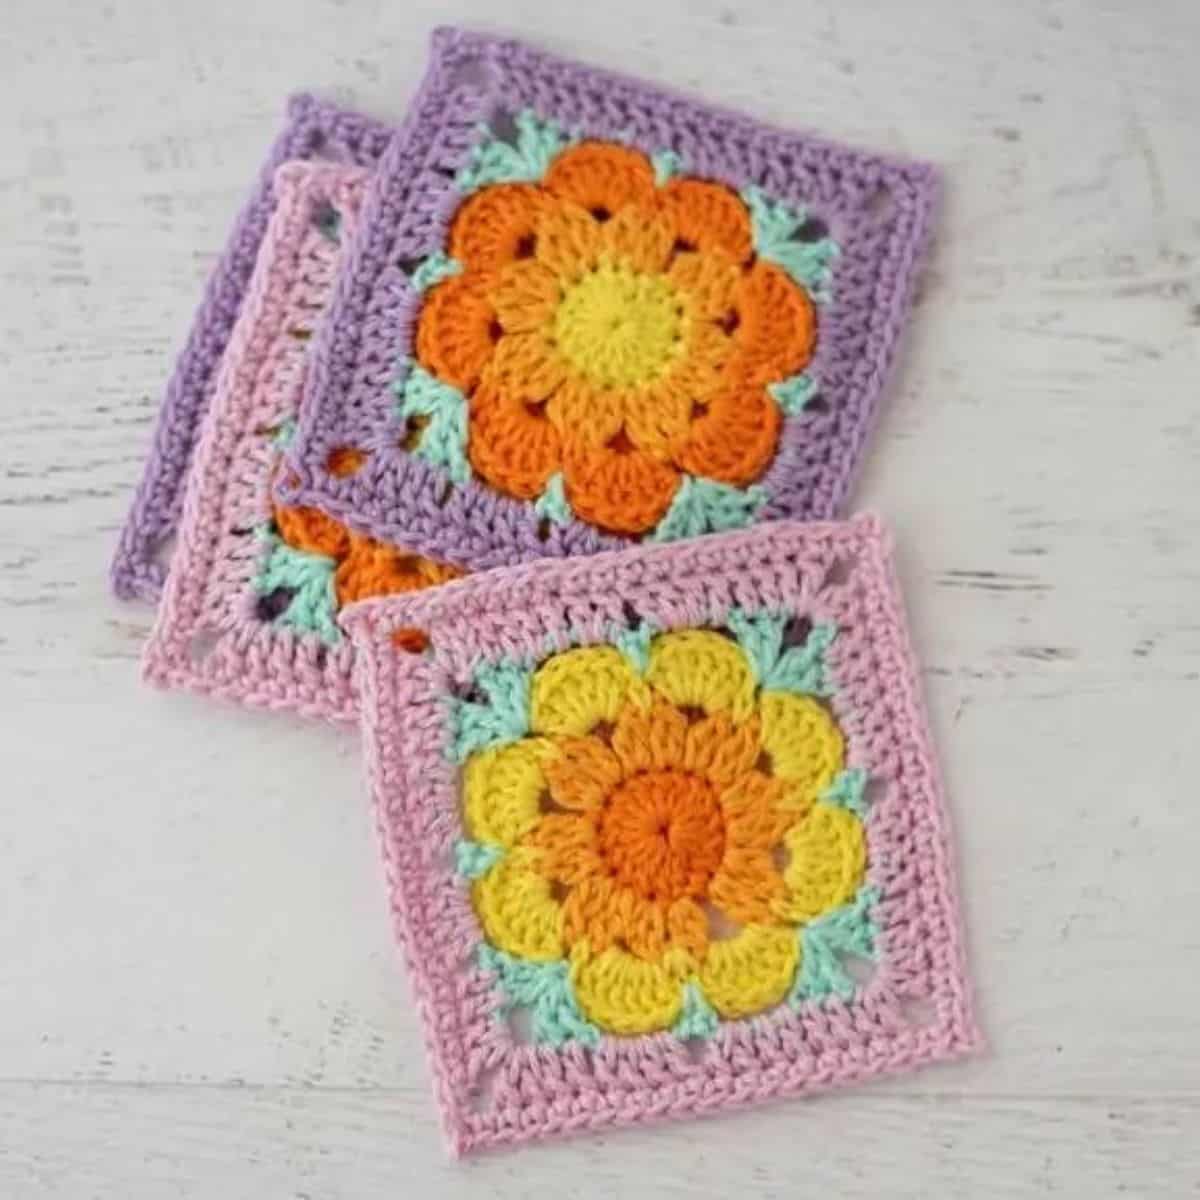 colorful square crochet coasters with a flower motif in the center